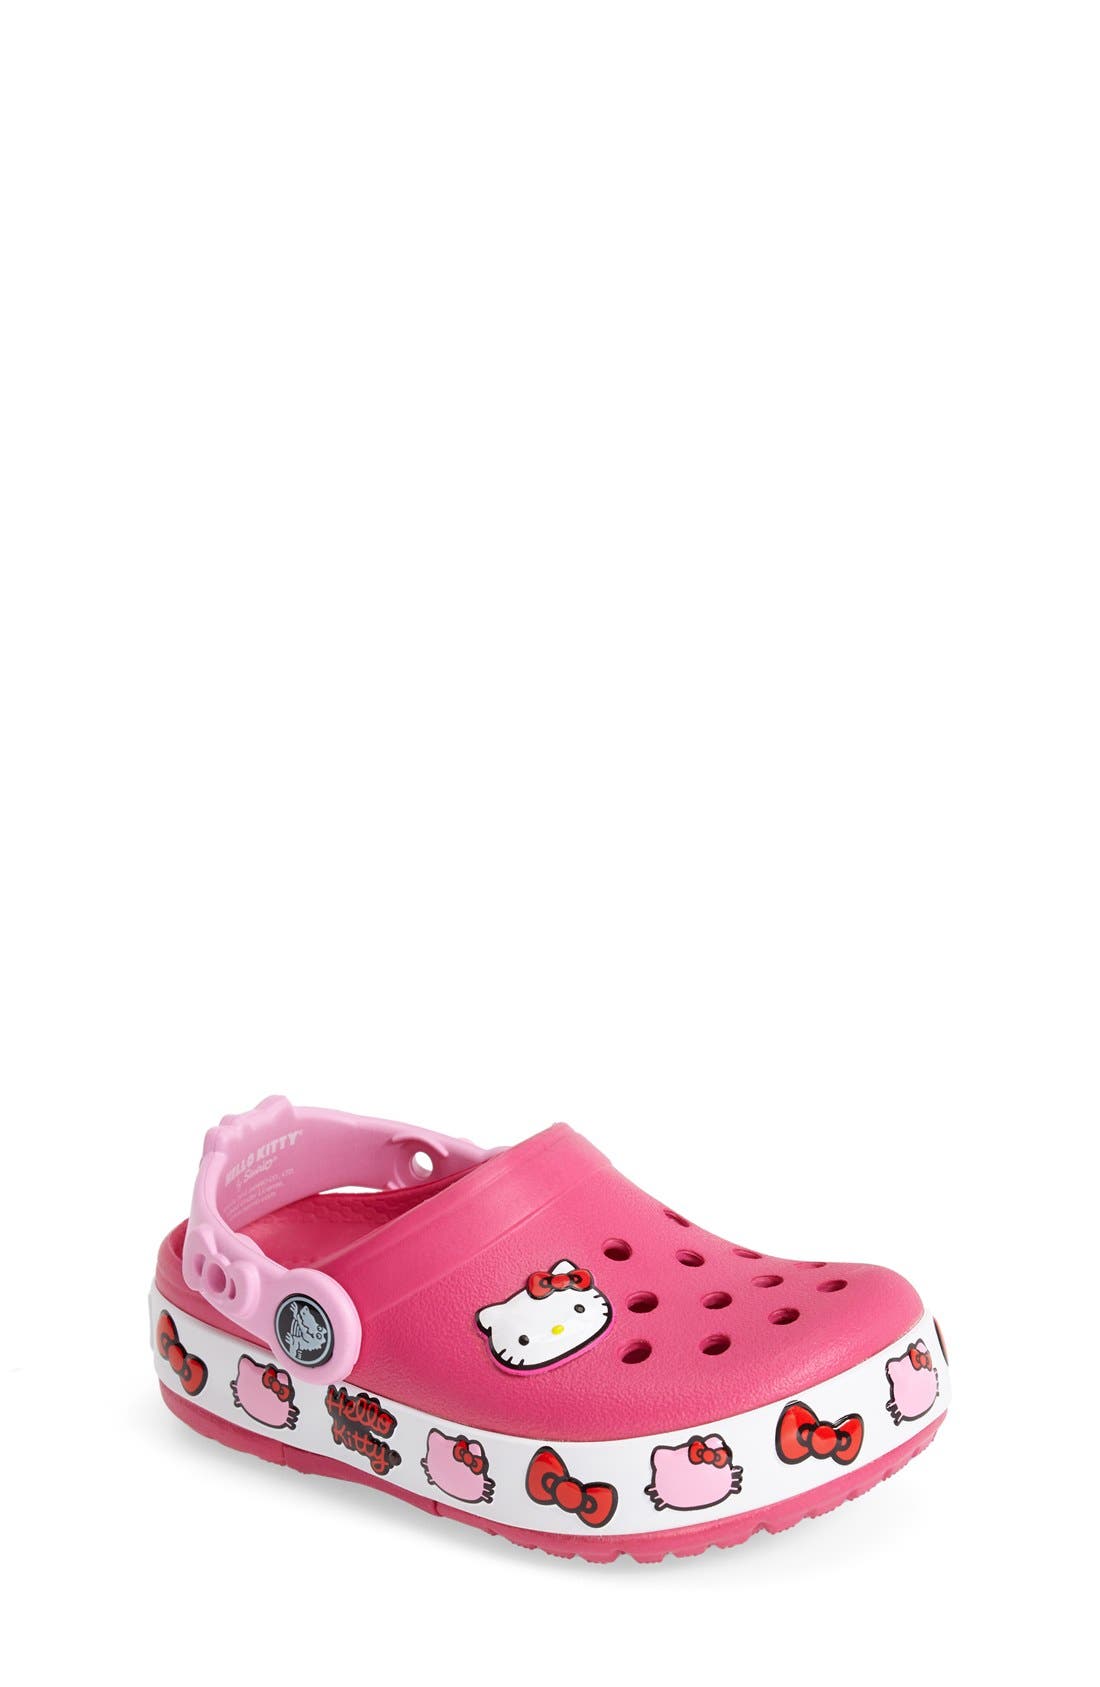 hello kitty crocs for adults